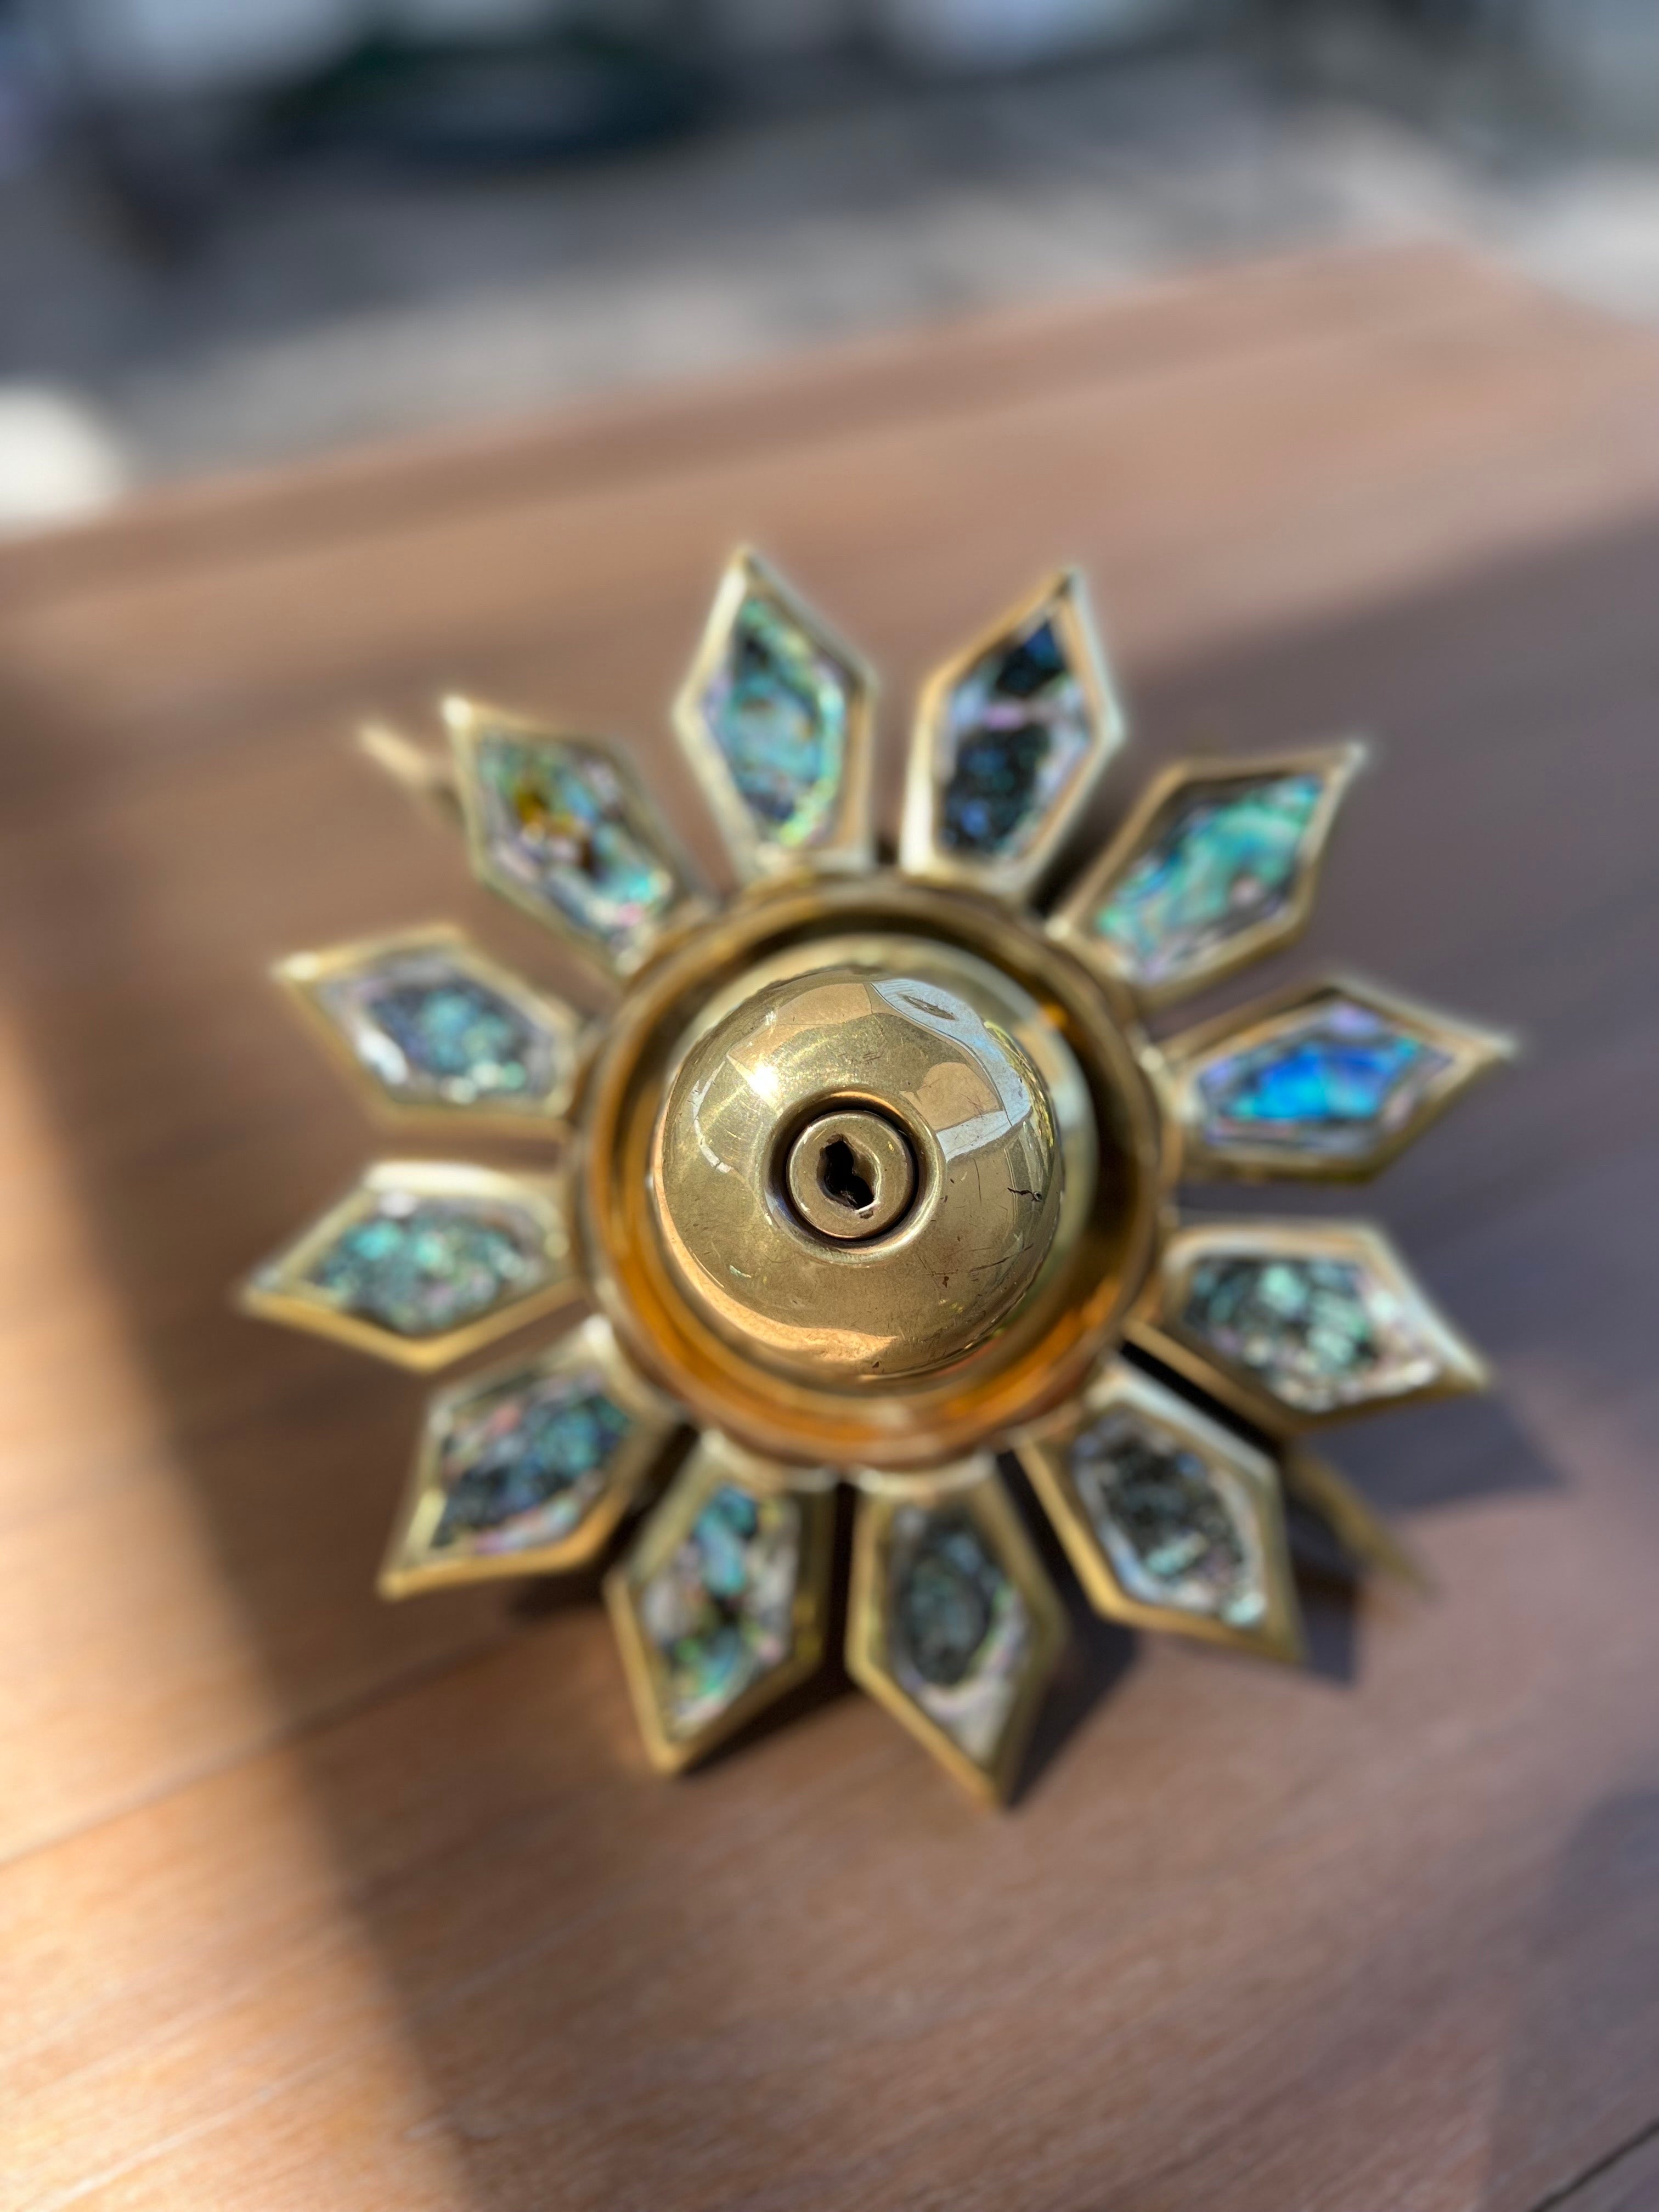 This knob has the two sides of a door, thinking in a common sense, interior and exterior side, on one side the Aztec sun, generally seen outside, and on the other the iconic mid-century star that would be on the inside side. All brass has been fully